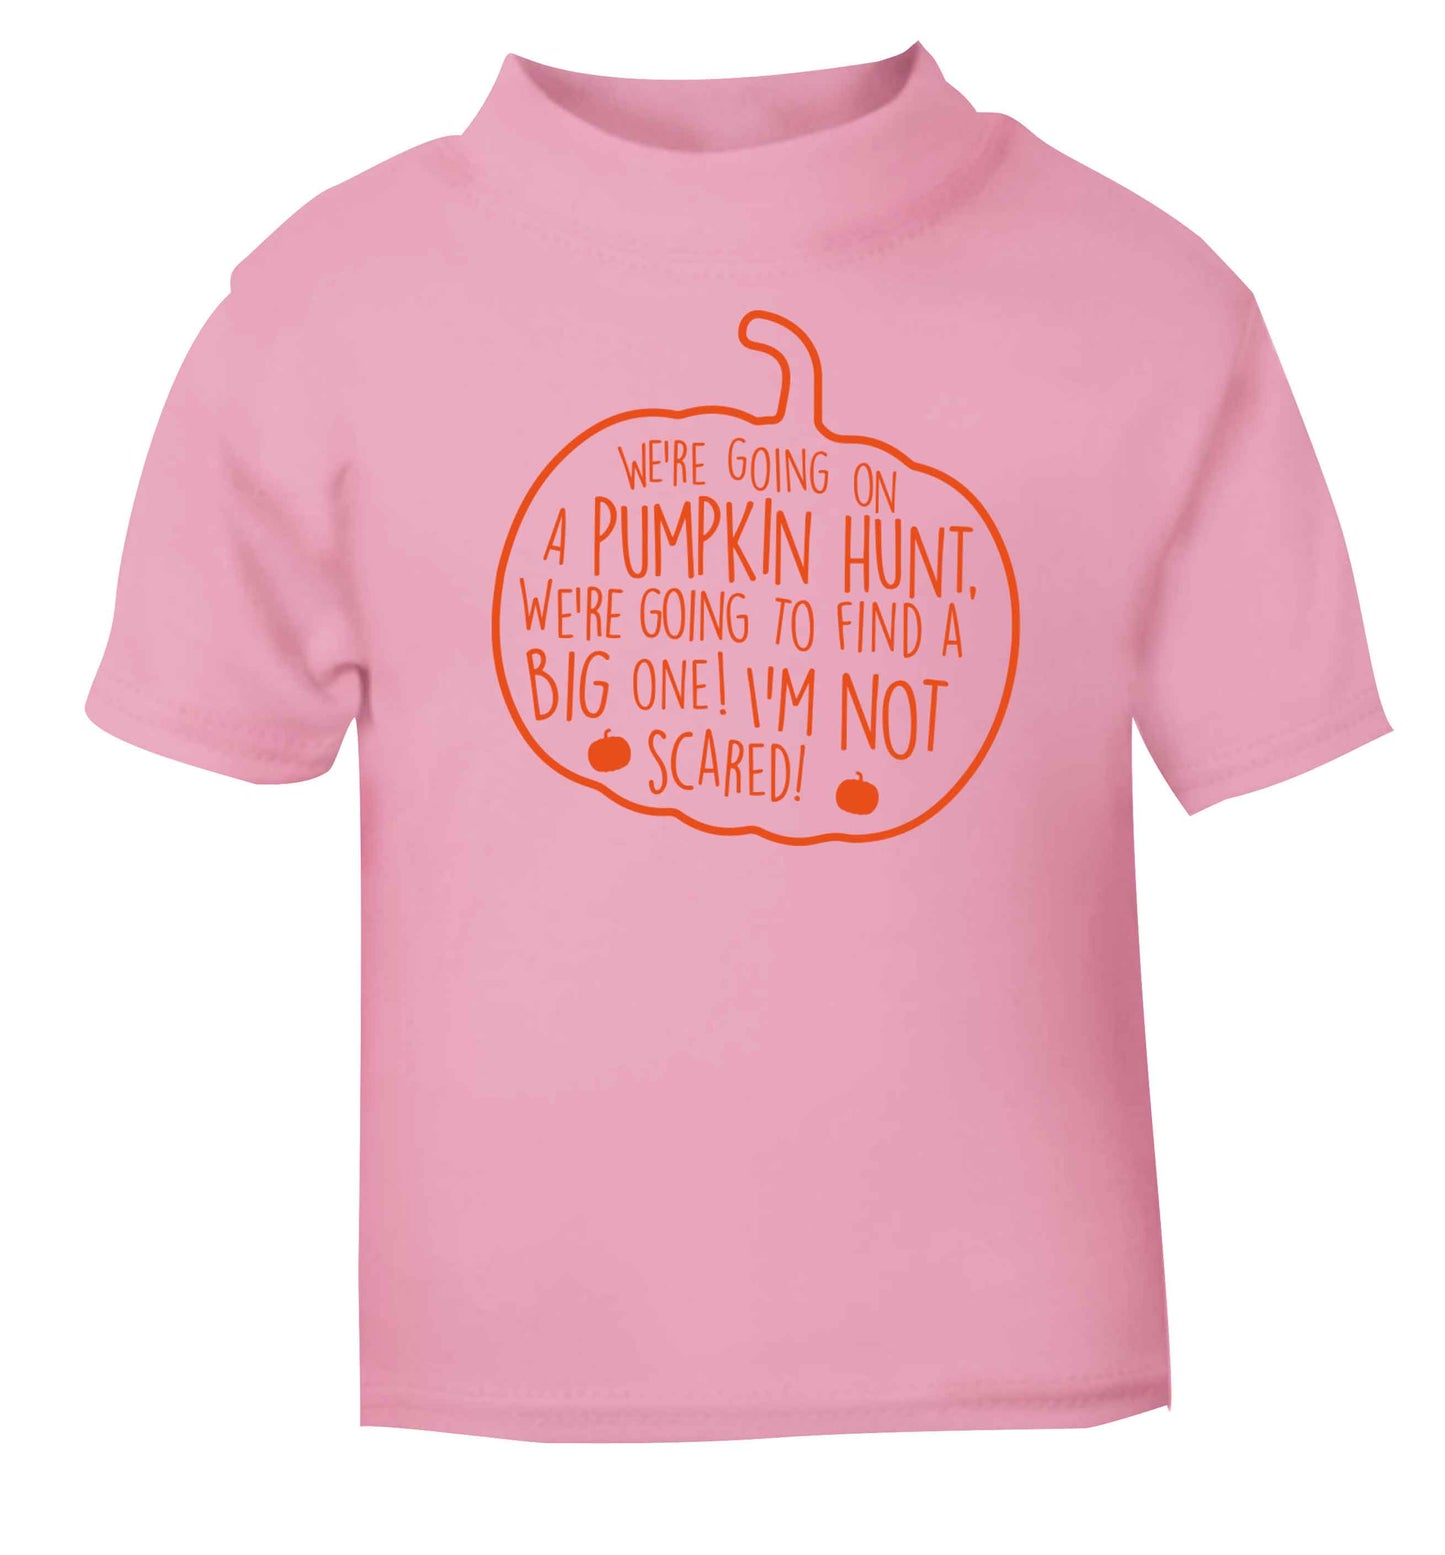 We're going on a pumpkin hunt light pink baby toddler Tshirt 2 Years